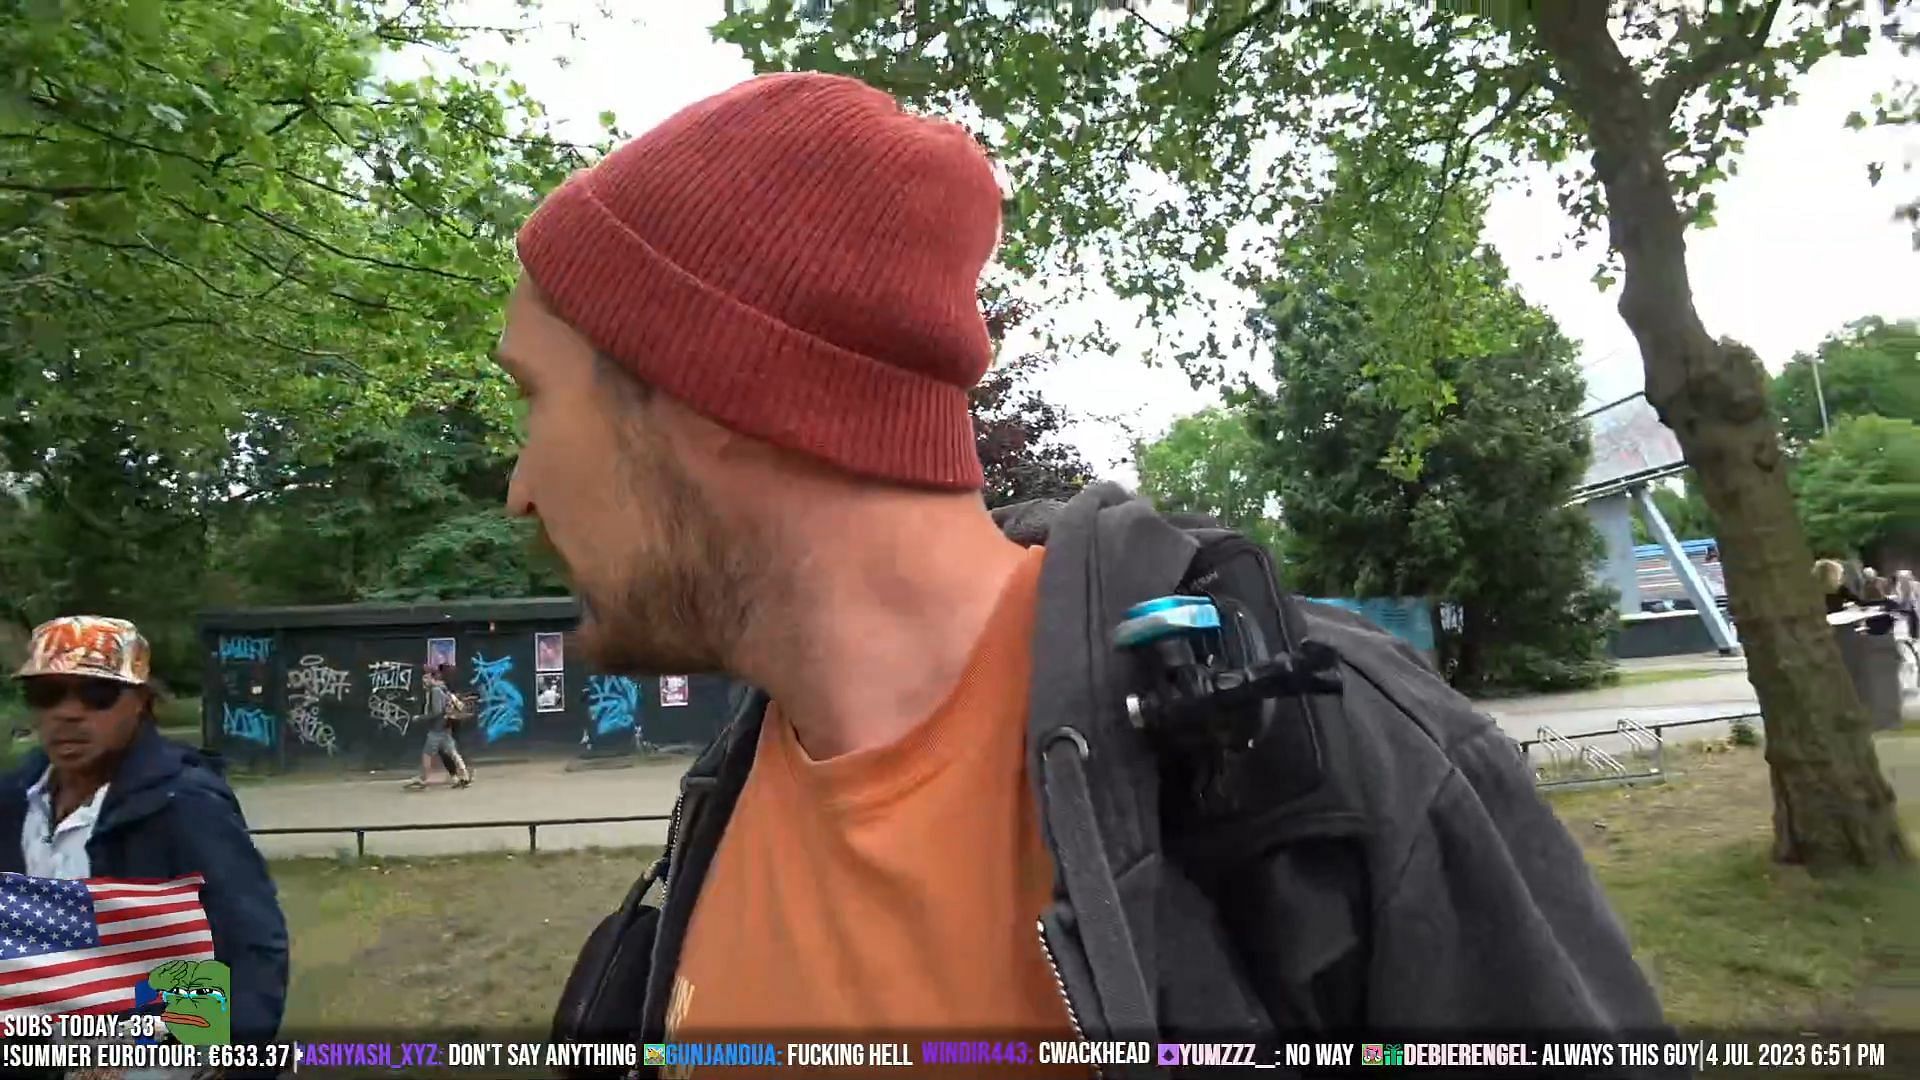 Man attacks Twitch streamer and breaks his filming equipment (Image via Raydempto/Twitch)